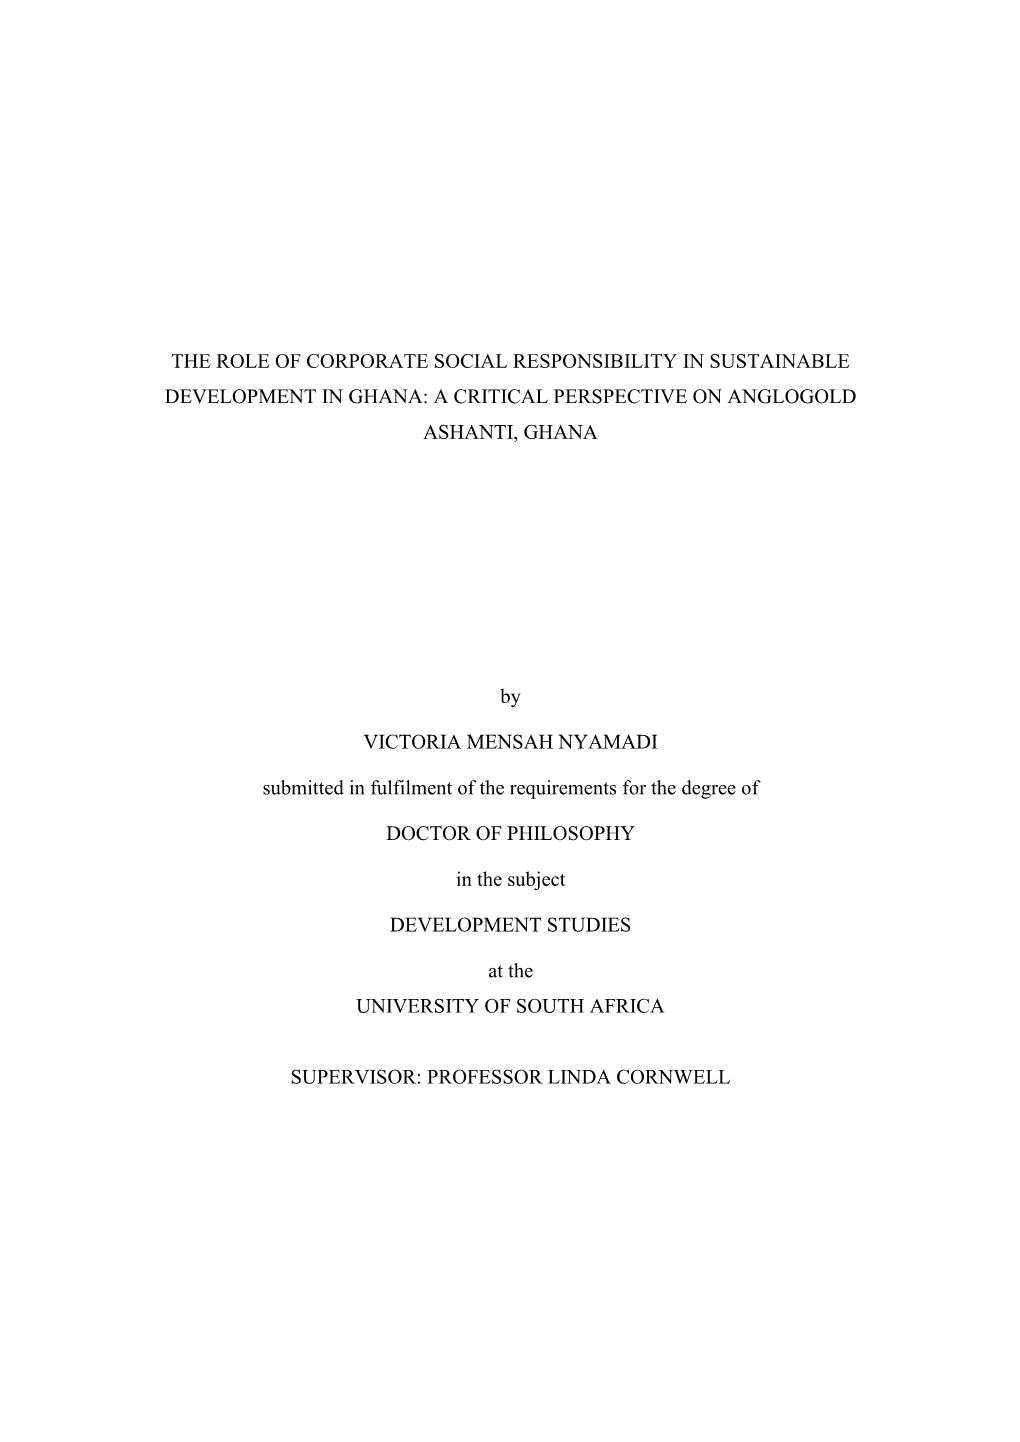 The Role of Corporate Social Responsibility in Sustainable Development in Ghana: a Critical Perspective on Anglogold Ashanti, Ghana